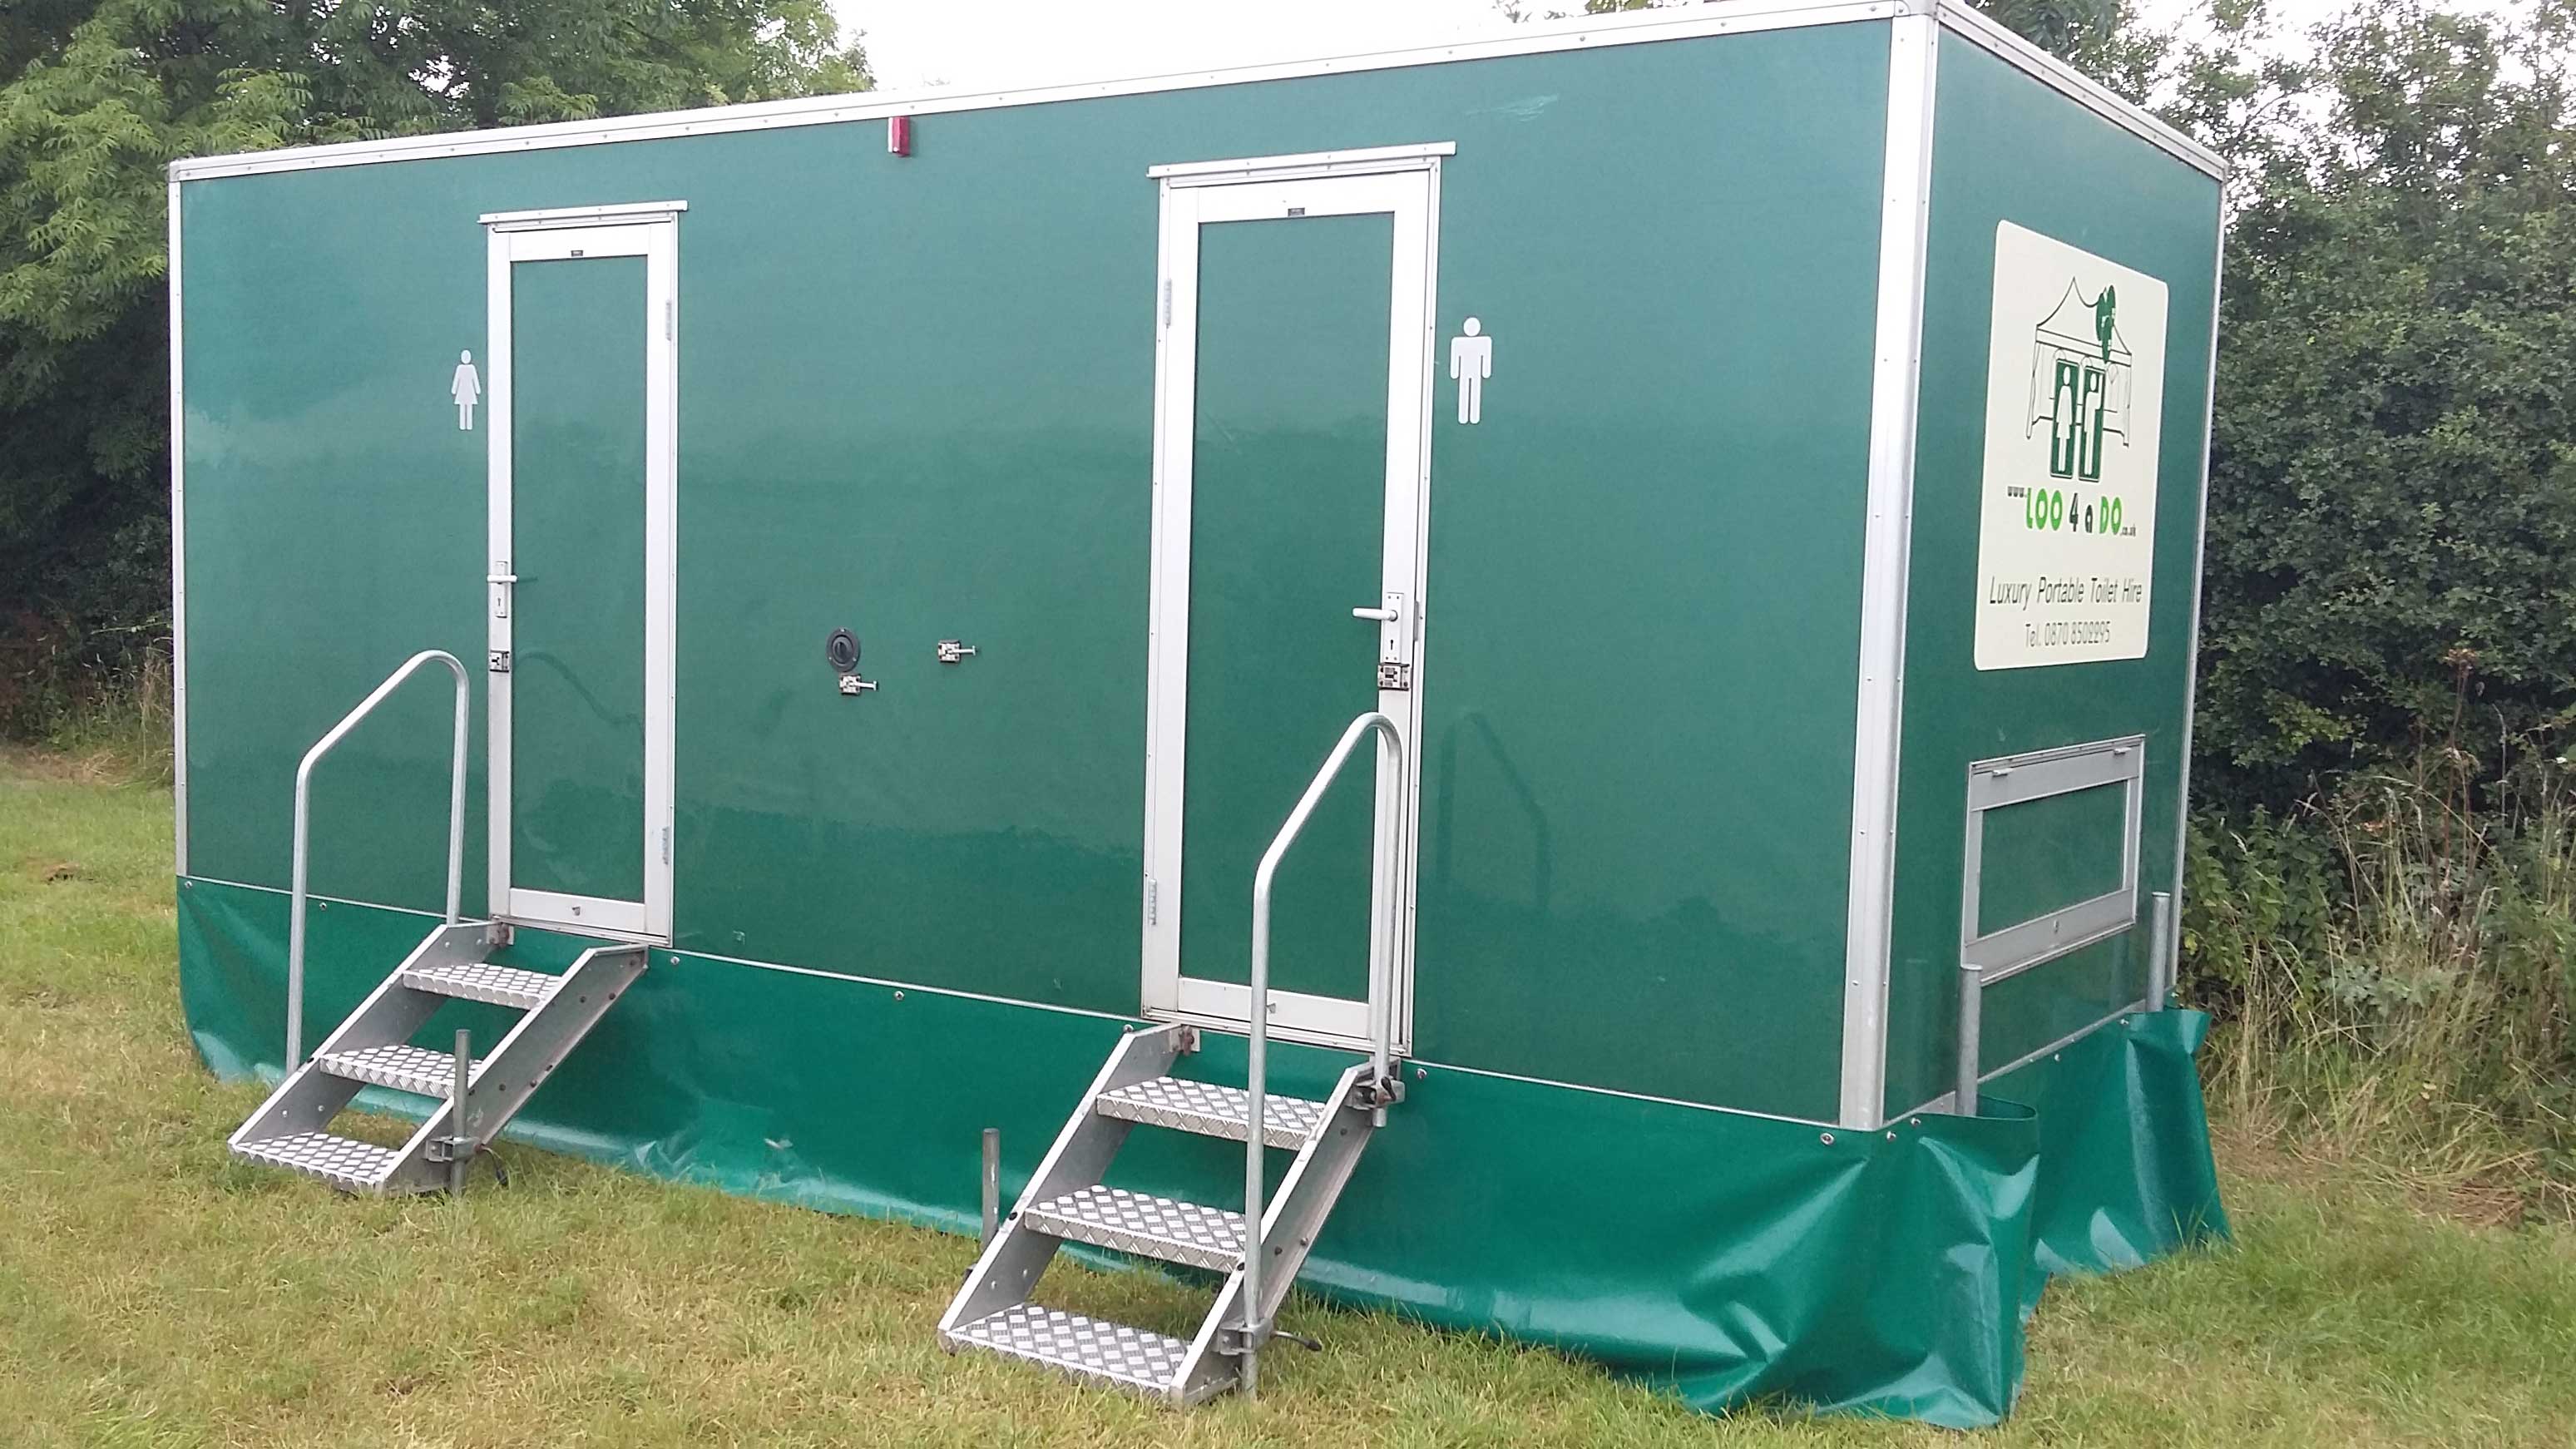 Executive toilet hire for events in Derbyshire